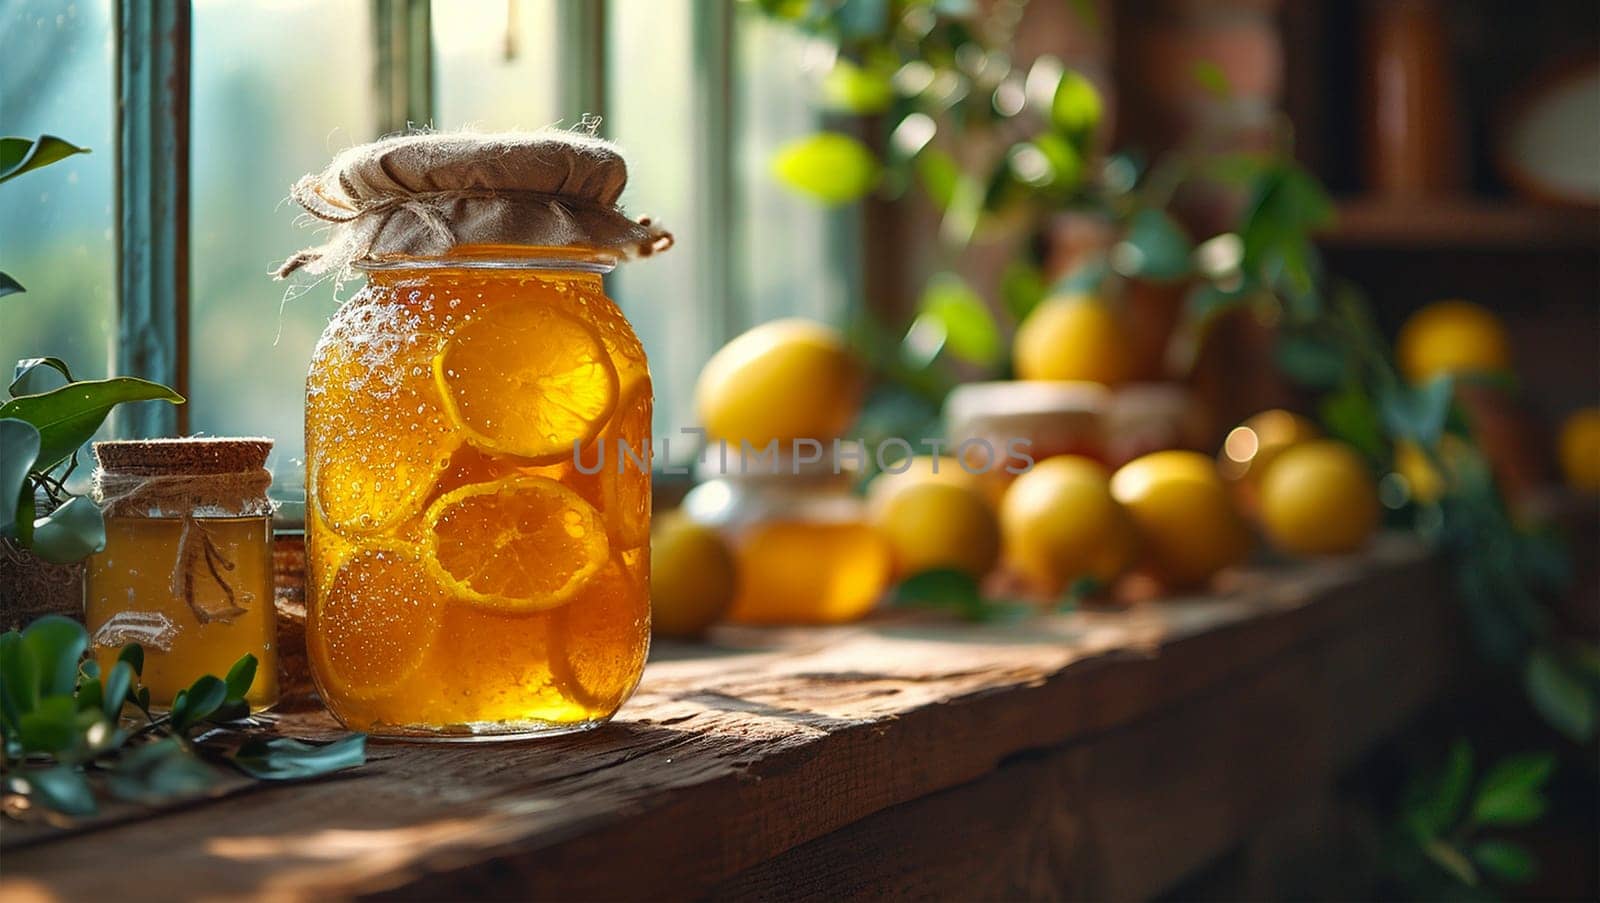 Homemade orange marmalade on wooden table. Seville Orange, Sour Orange, Bitter Orange, Marmalade Orange - native Southeast Asia tropical fruit. Homemade Tasty Jam on white background. Healthy Food. by Annebel146